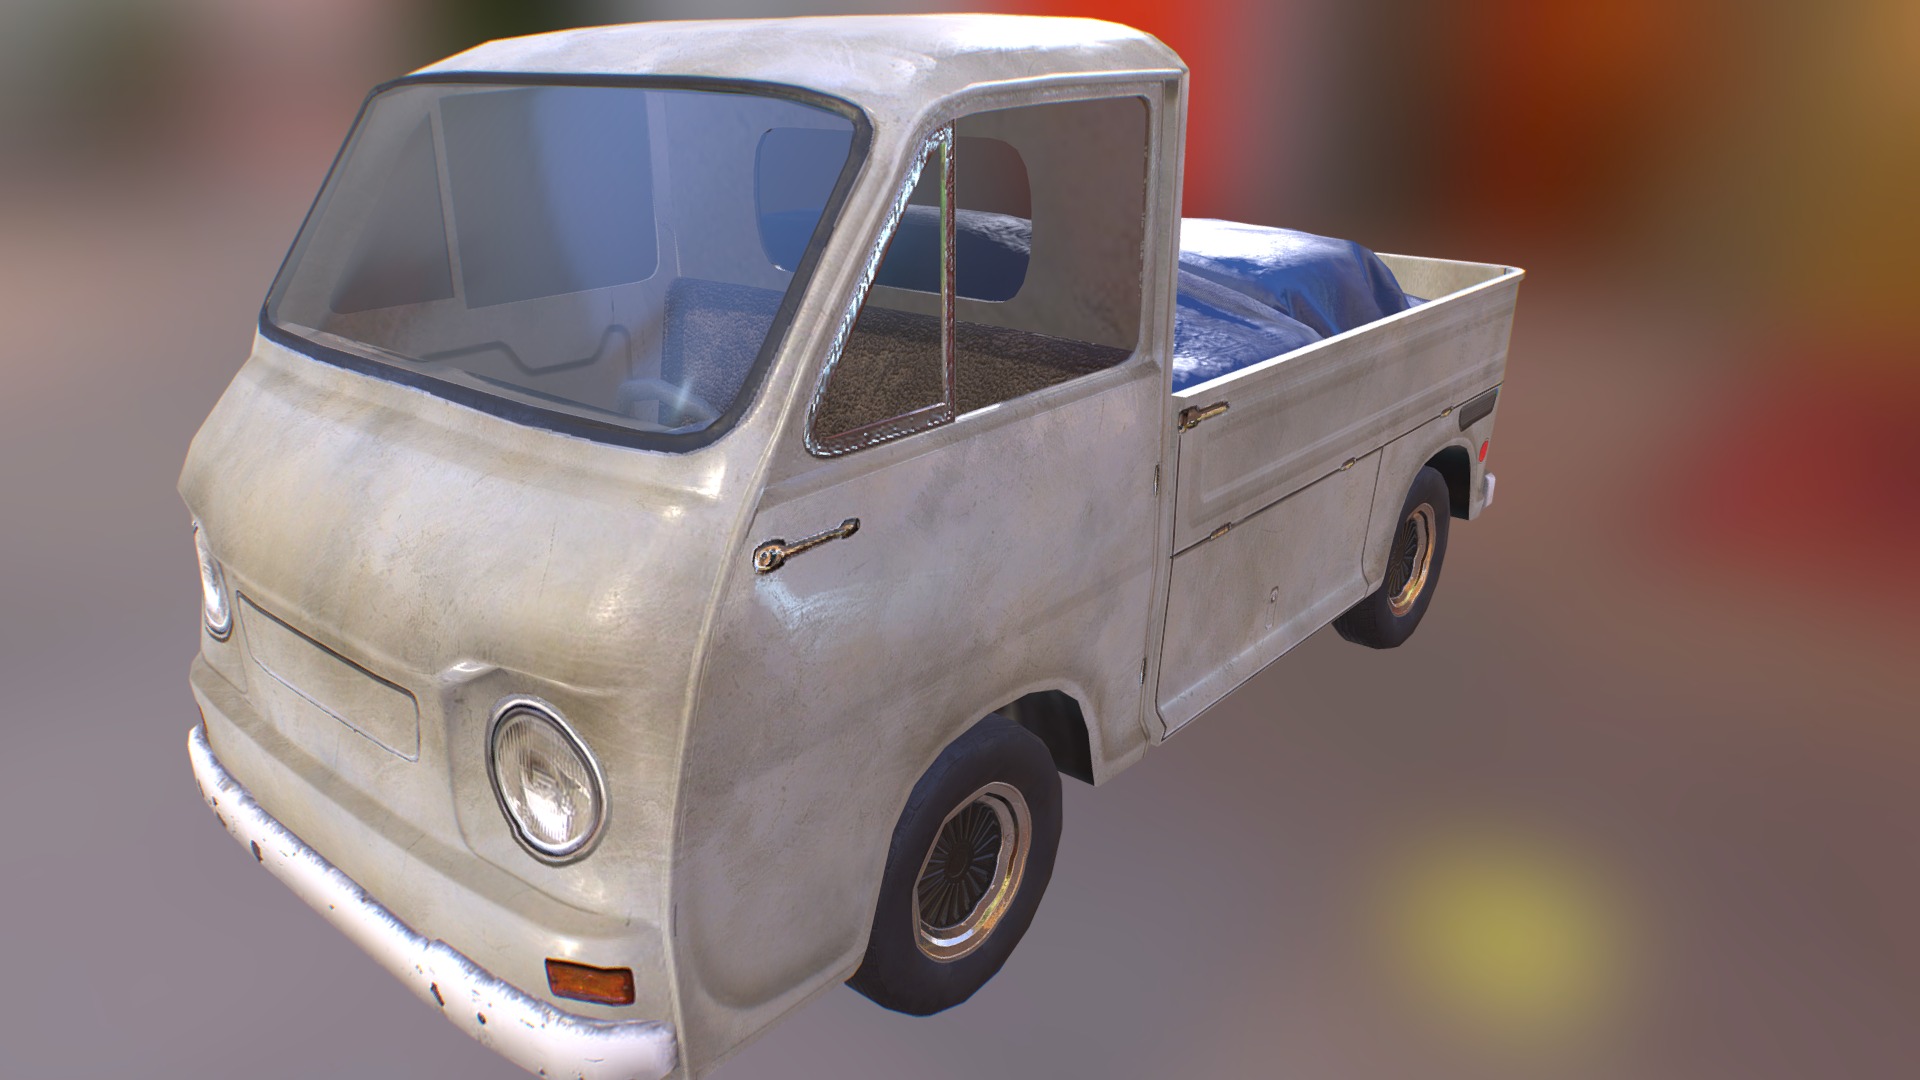 3D model Subaru Sambar lowpoly model - This is a 3D model of the Subaru Sambar lowpoly model. The 3D model is about a small white car.